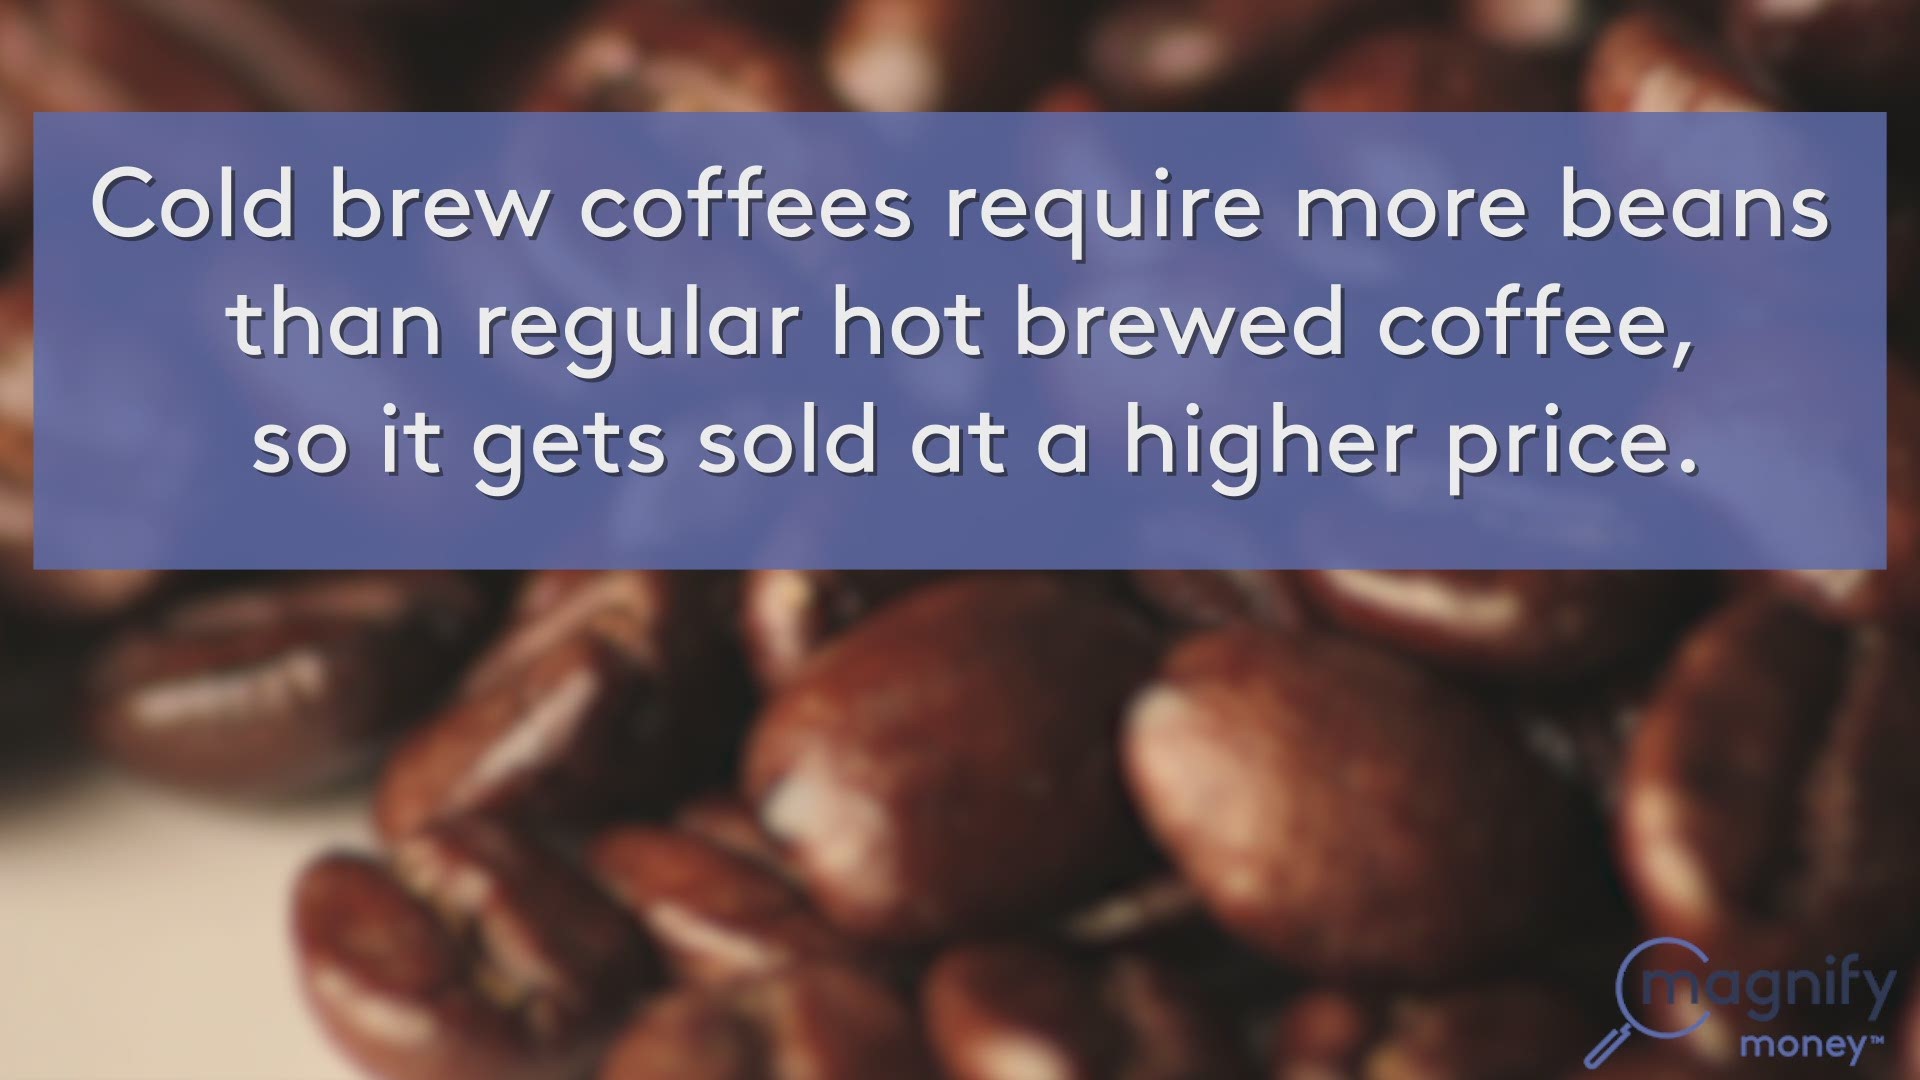 Has a cup of coffee gotten too expensive?